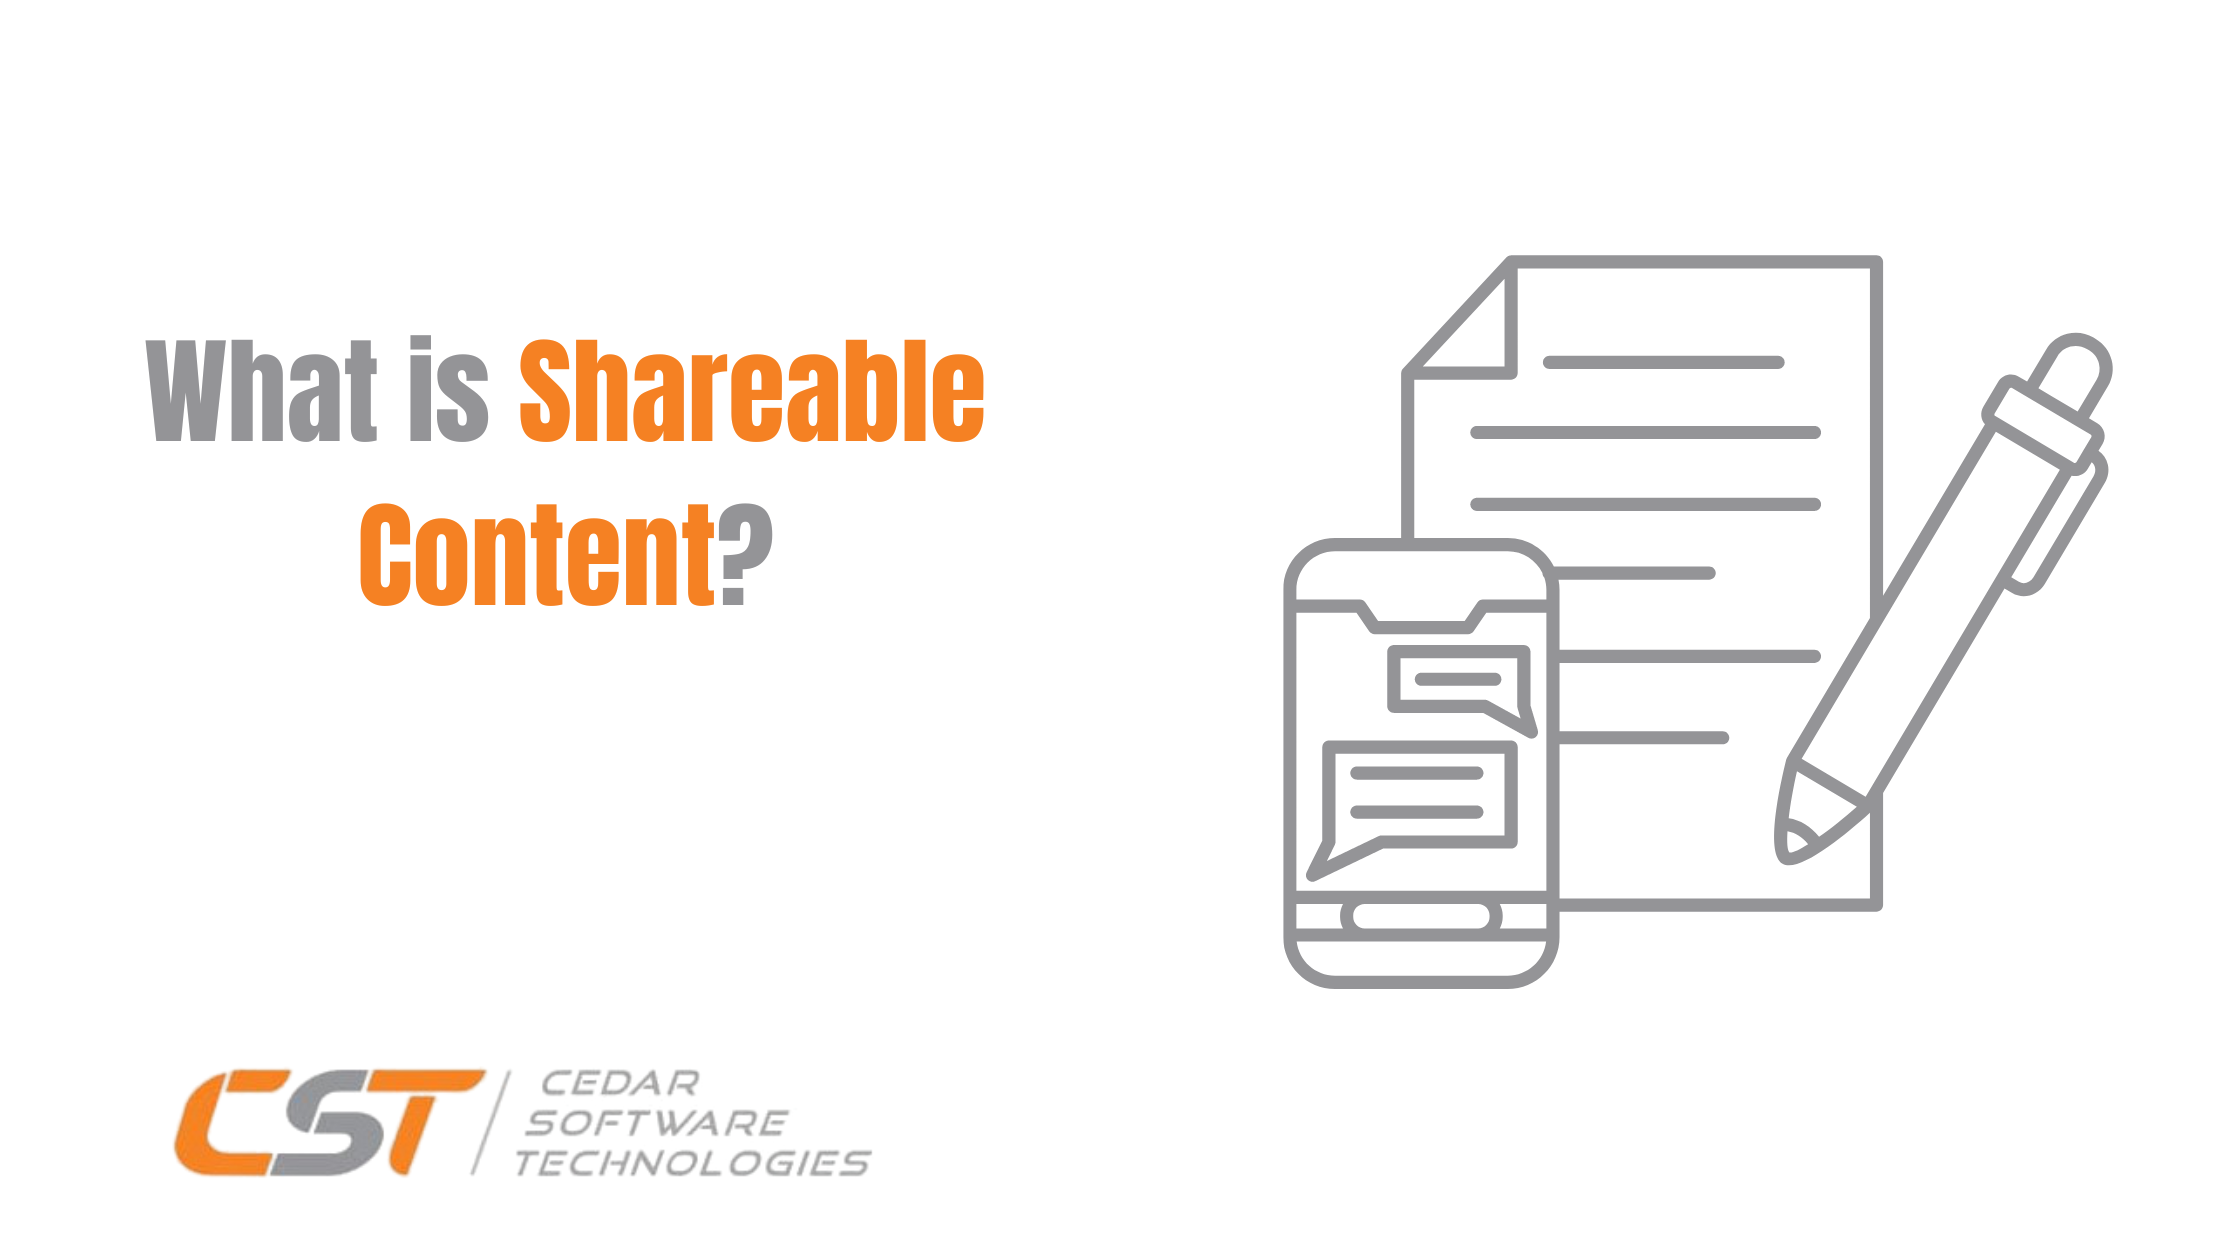 What is Shareable Content?